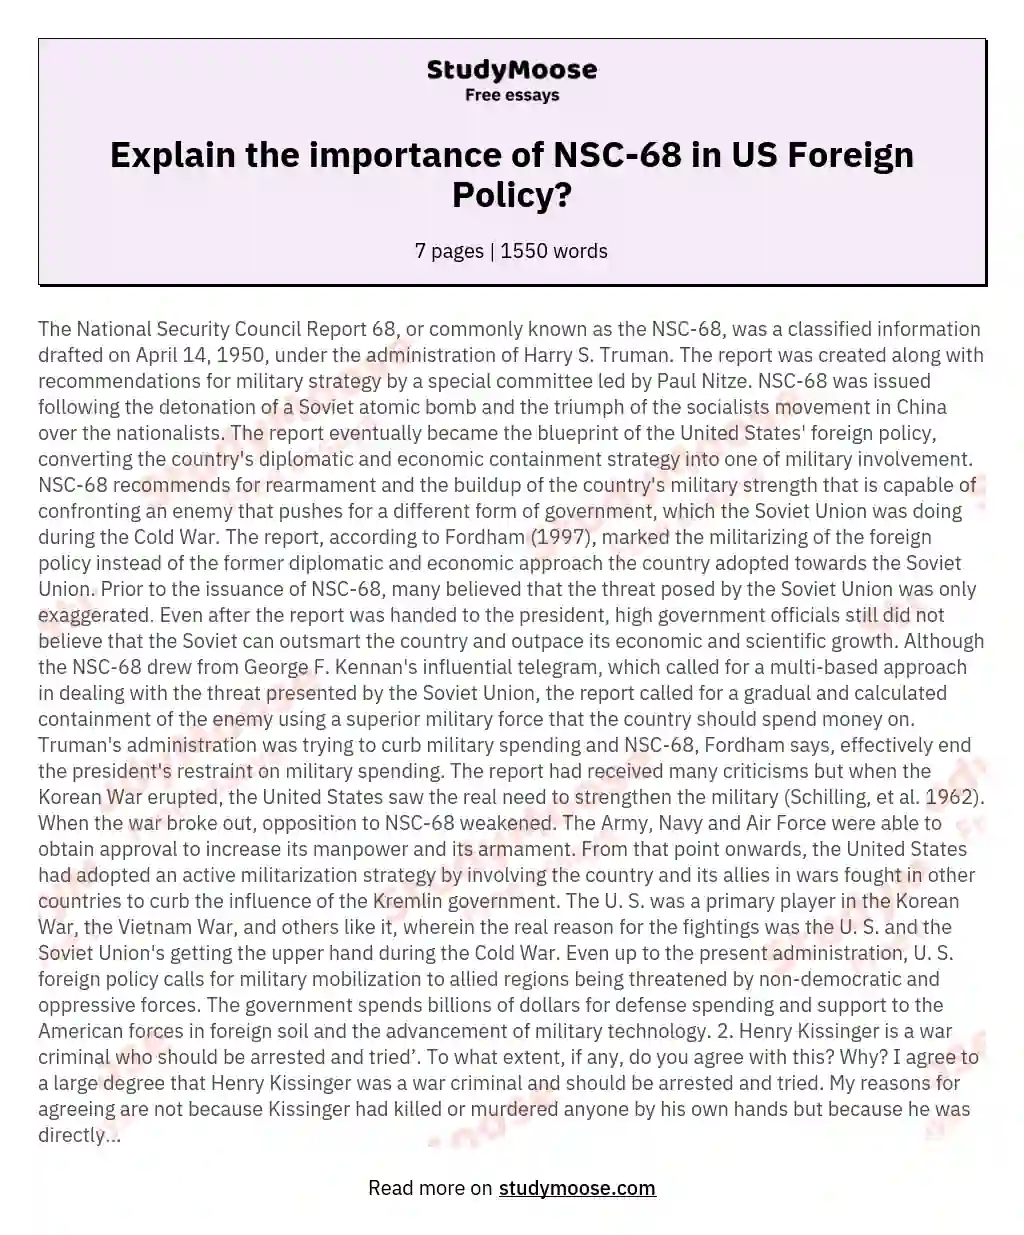 Explain the importance of NSC-68 in US Foreign Policy? essay